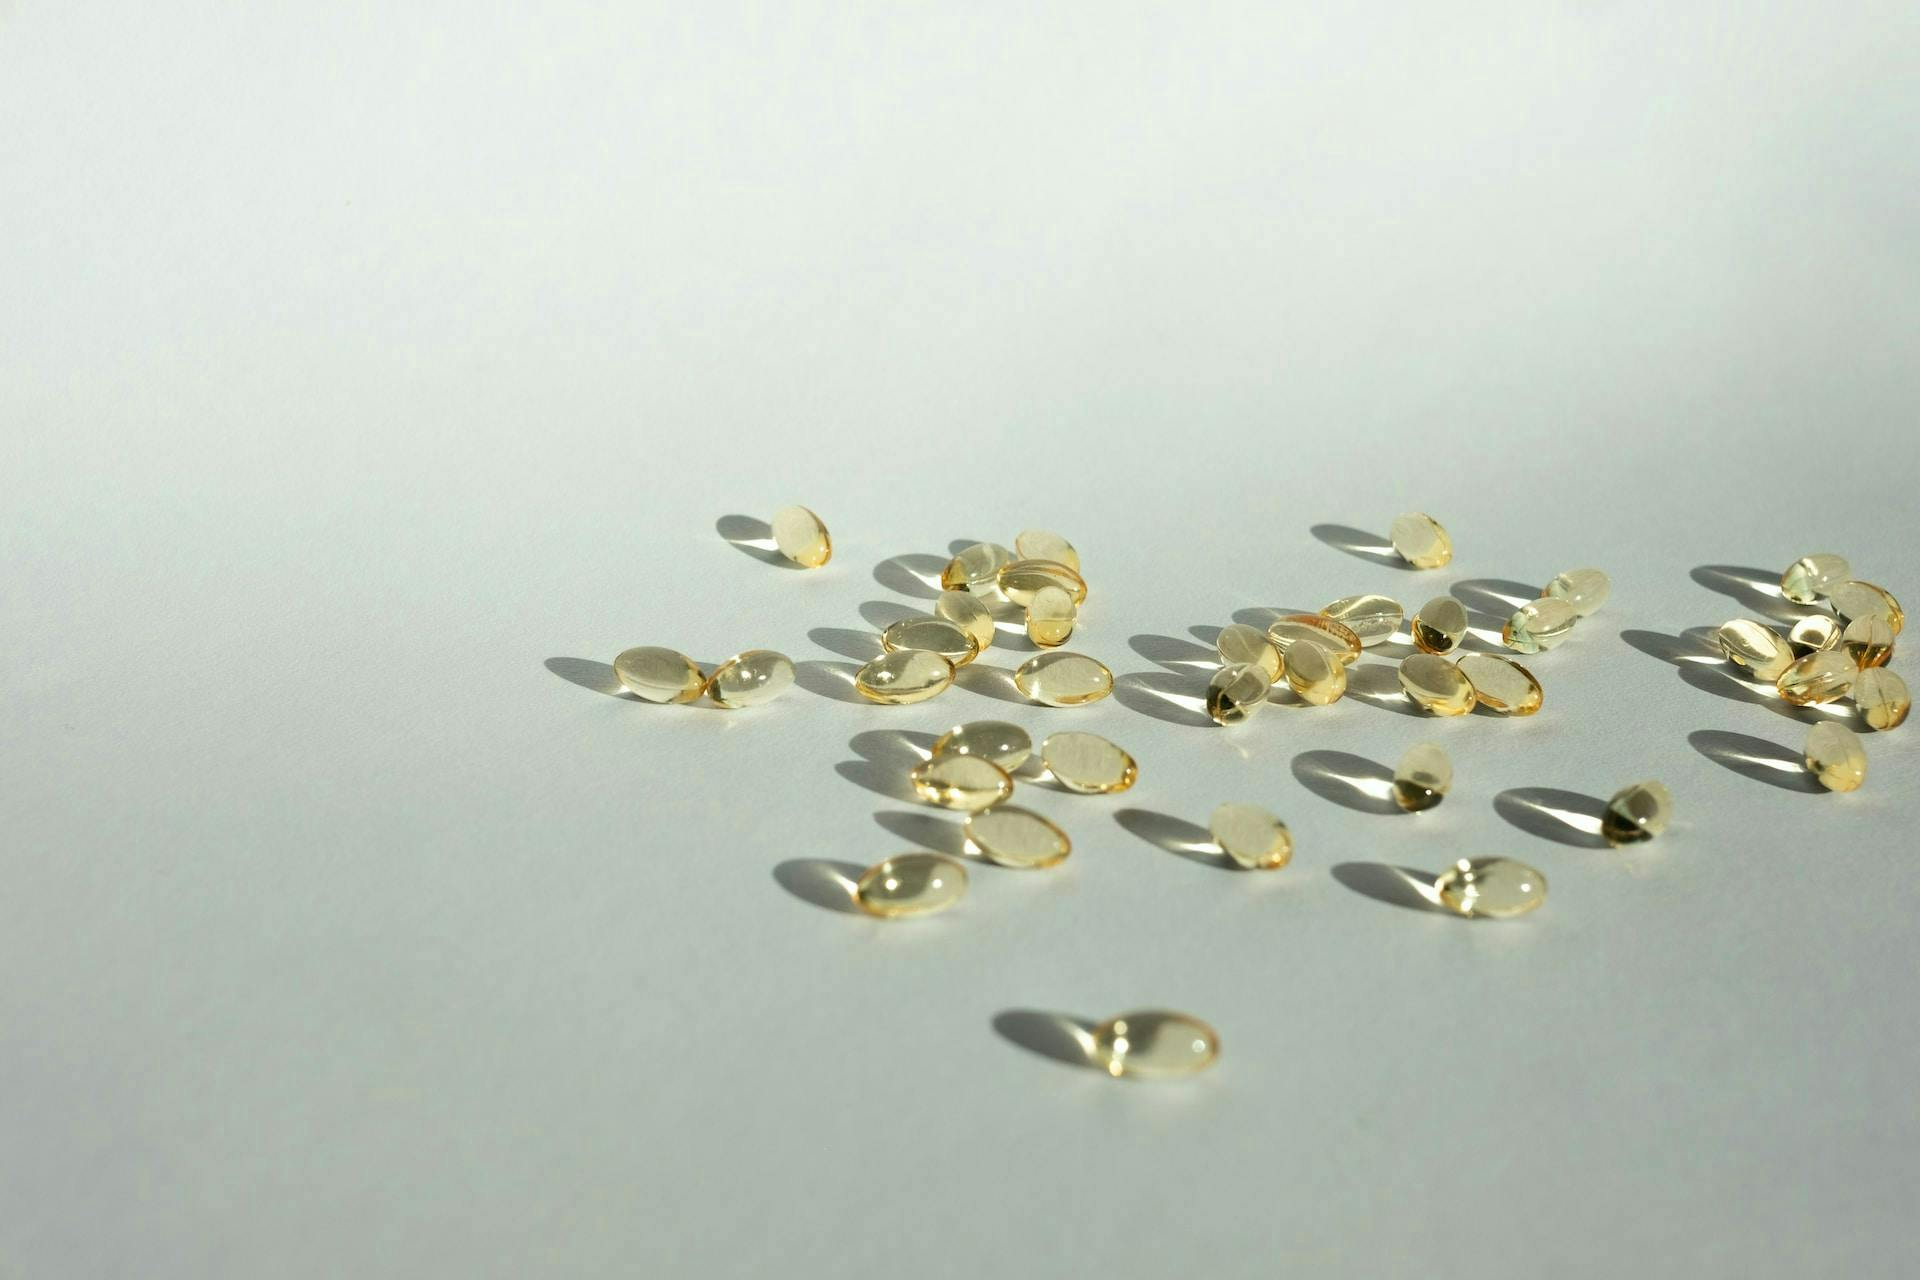 gel capsules lying on flat surface